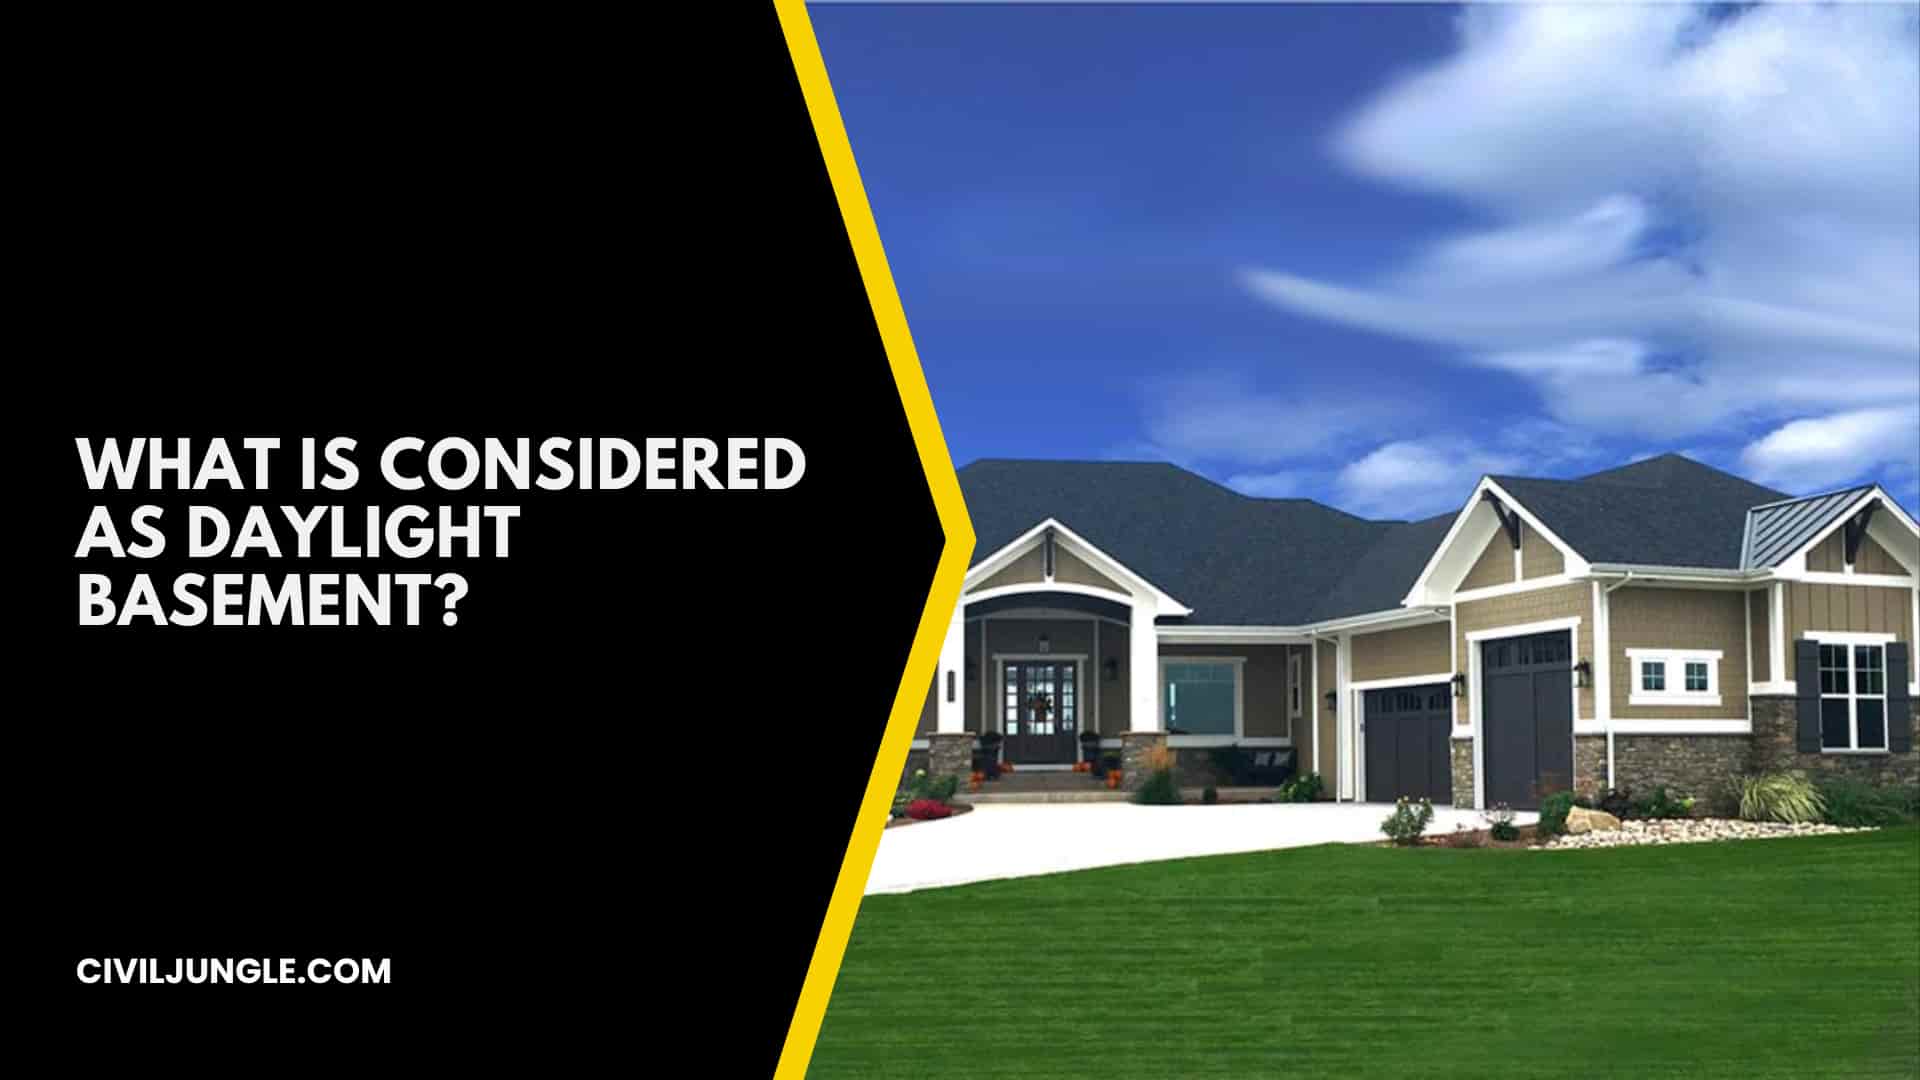 What Is Considered as Daylight Basement?